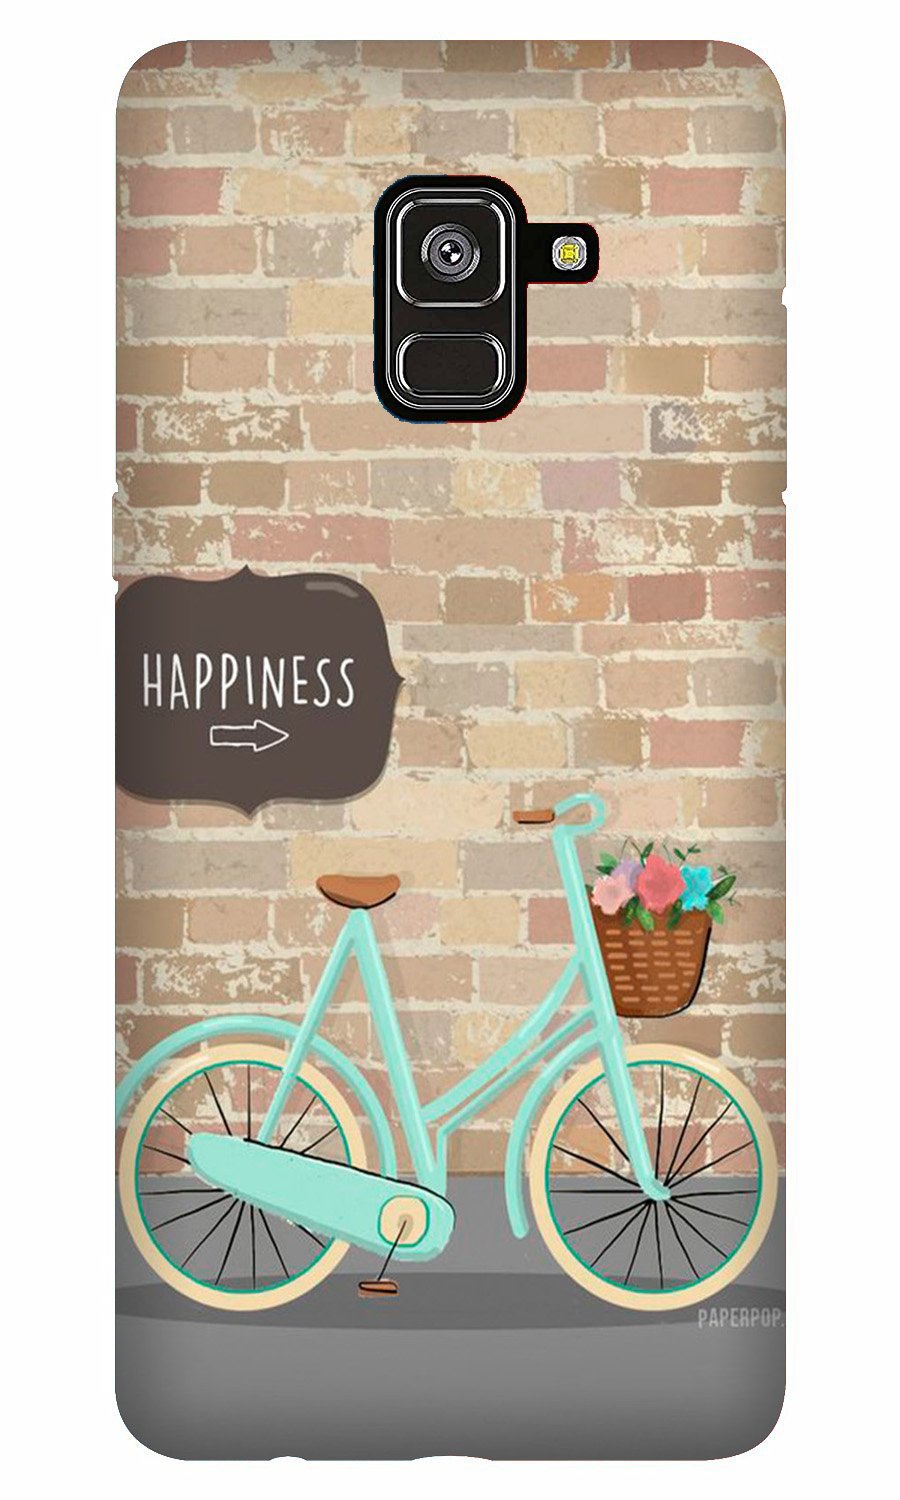 Happiness Case for Galaxy A8 Plus